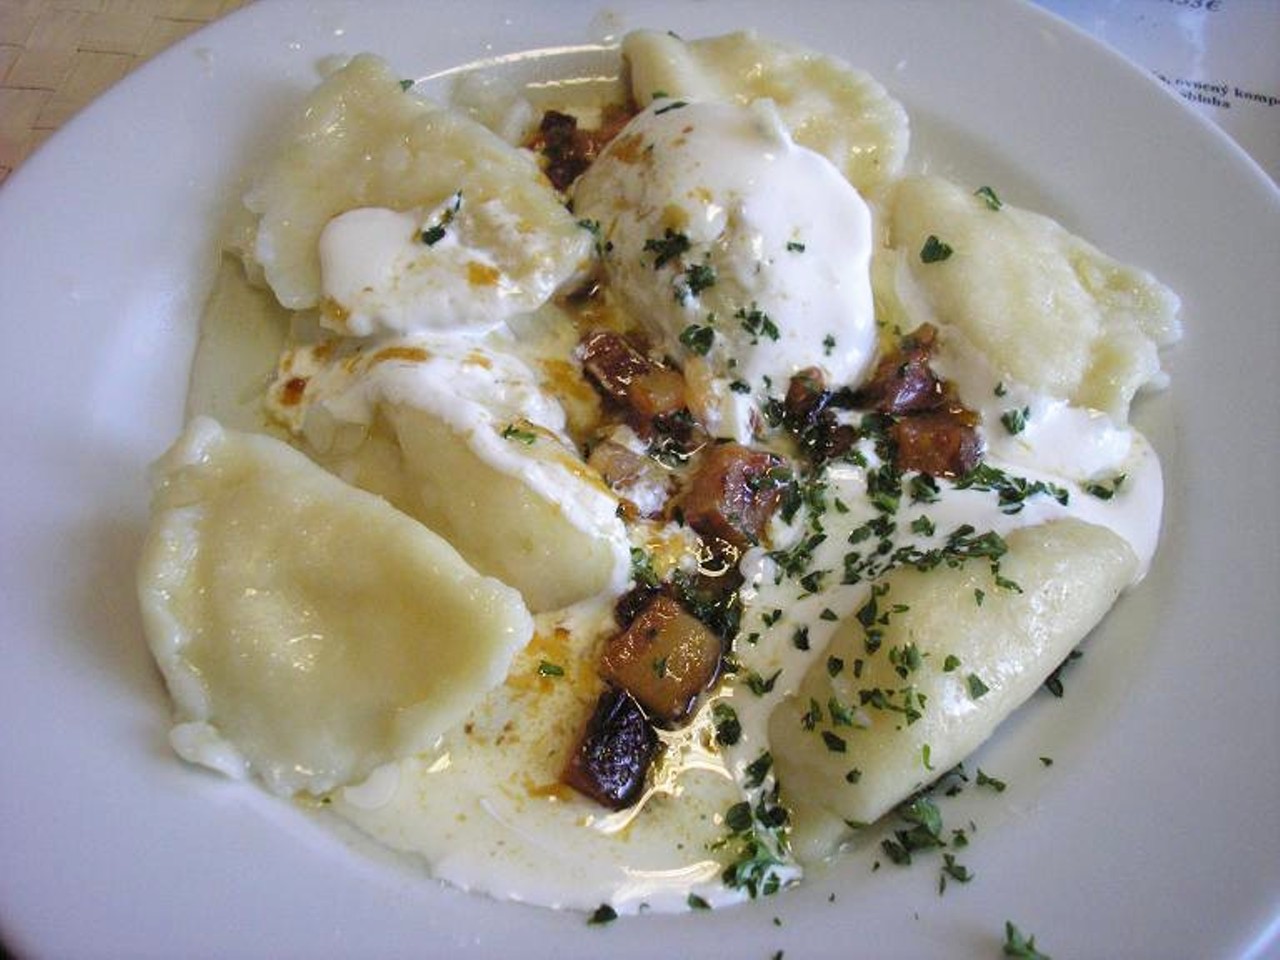 Pierogi
What: Those wonderful potato-and-cheese stuffed dumplings
Why: Cleveland's Eastern European immigrants brought them generations ago, and they've been a beloved staple of the city's cuisine ever since
Photo via Scene Archives